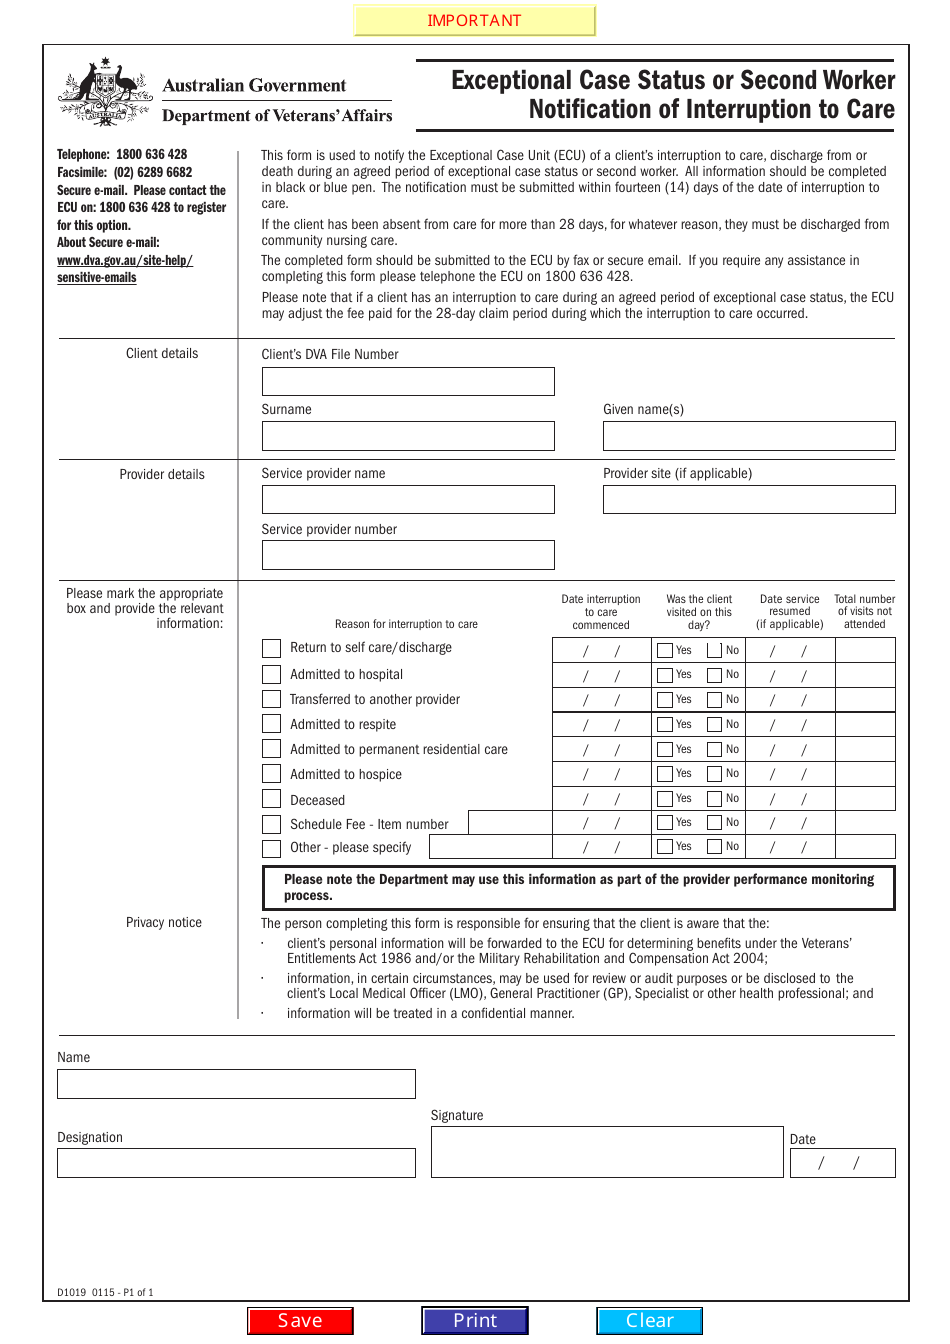 Form D1019 Exceptional Case Status or Second Worker Notification of Interruption to Care - Australia, Page 1